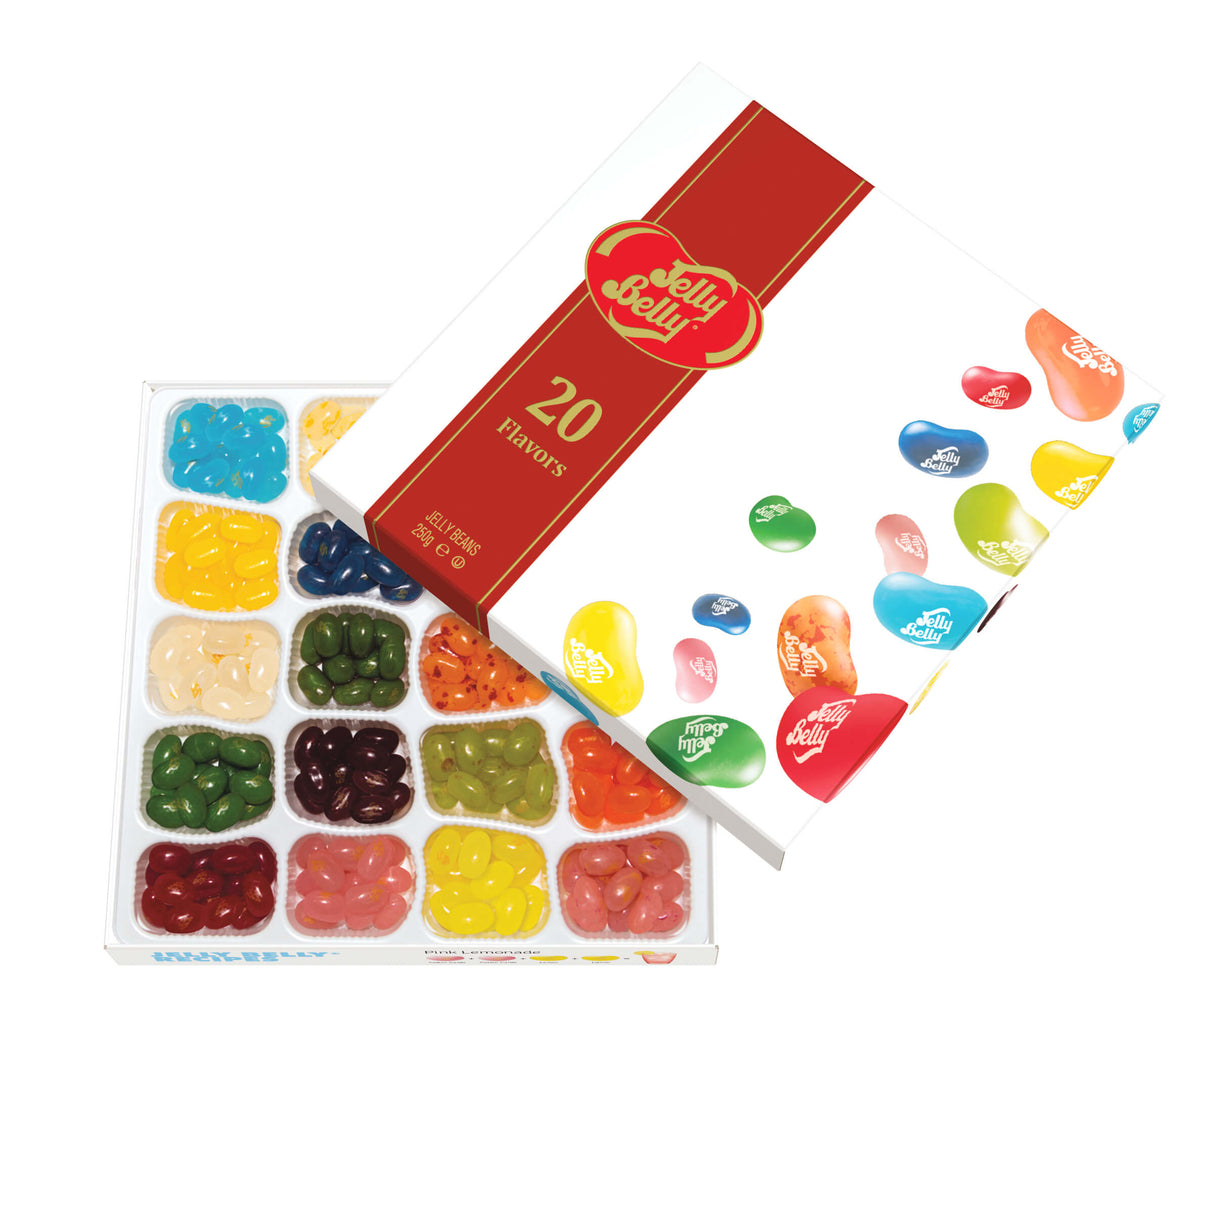 Jelly Belly 20 Flavour Gift Box - 250g